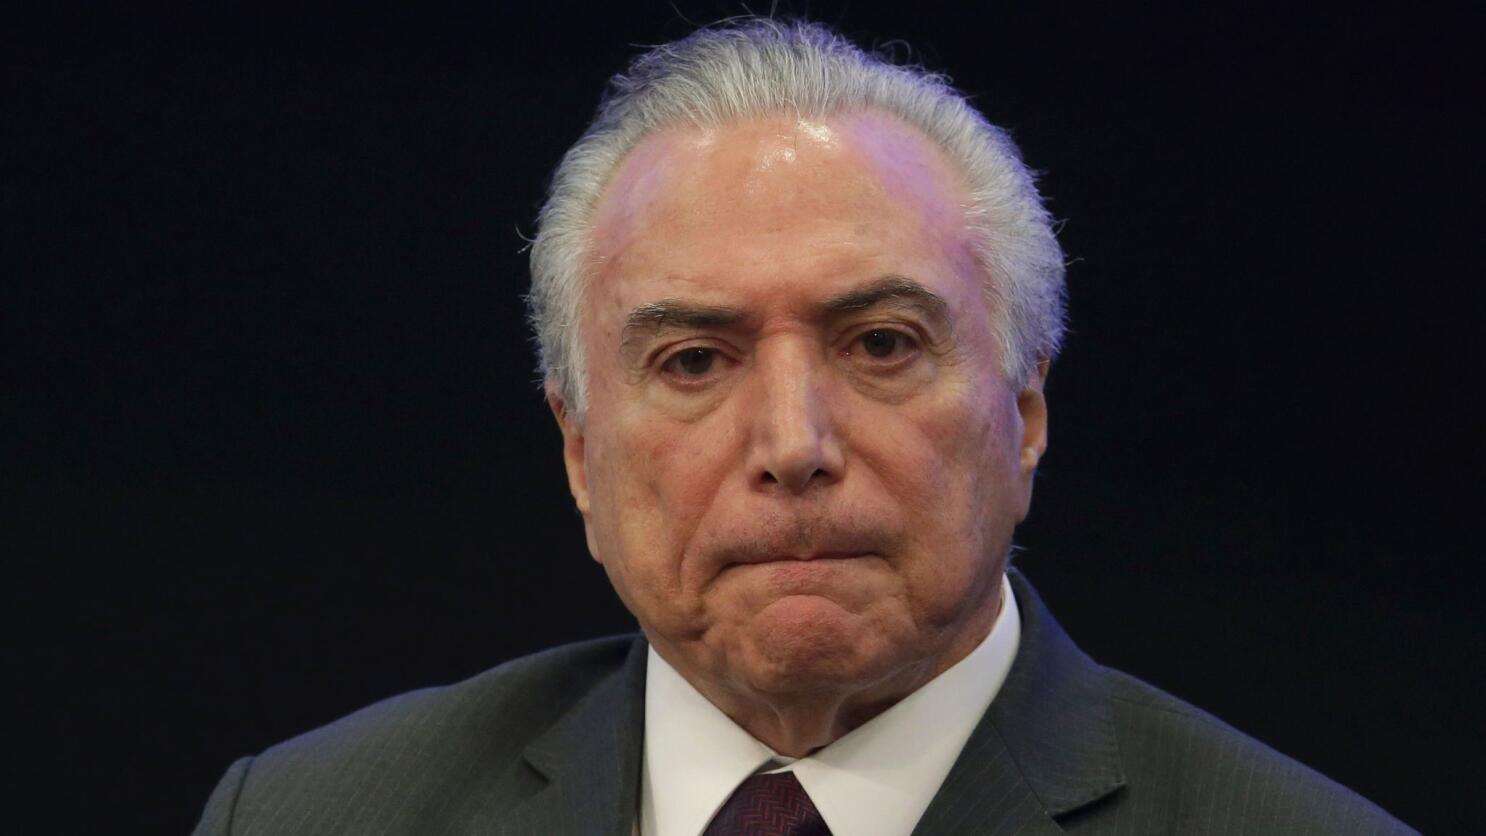 Brazil Real Plunges Against Dollar After Report President Temer